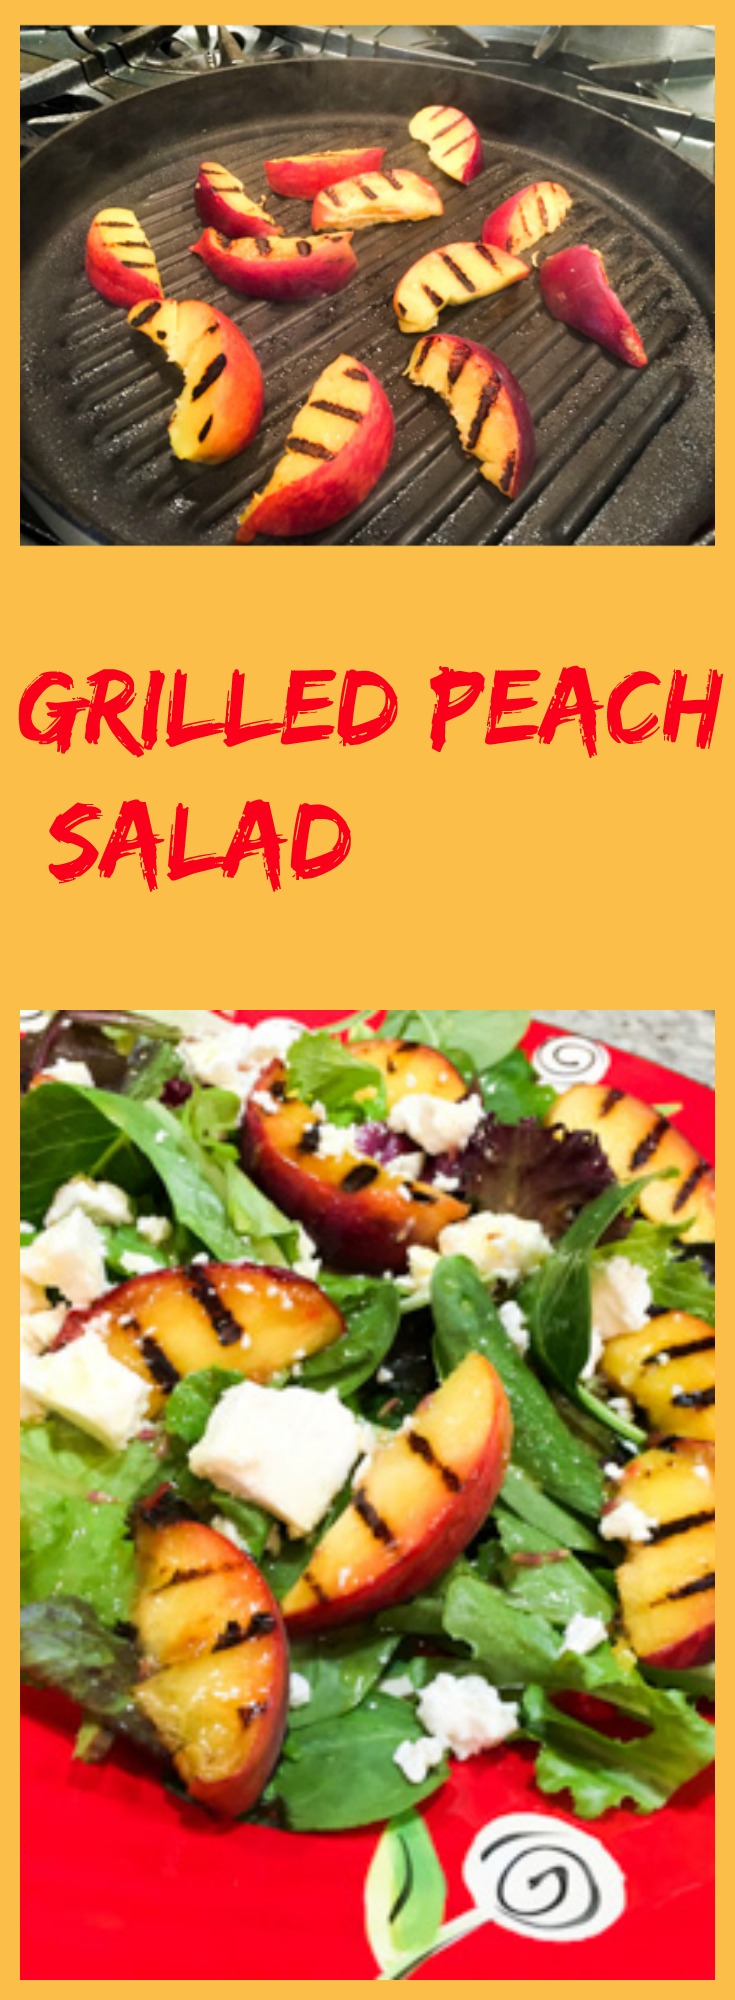 Grilled Peach Salad, from Bewitching Kitchen